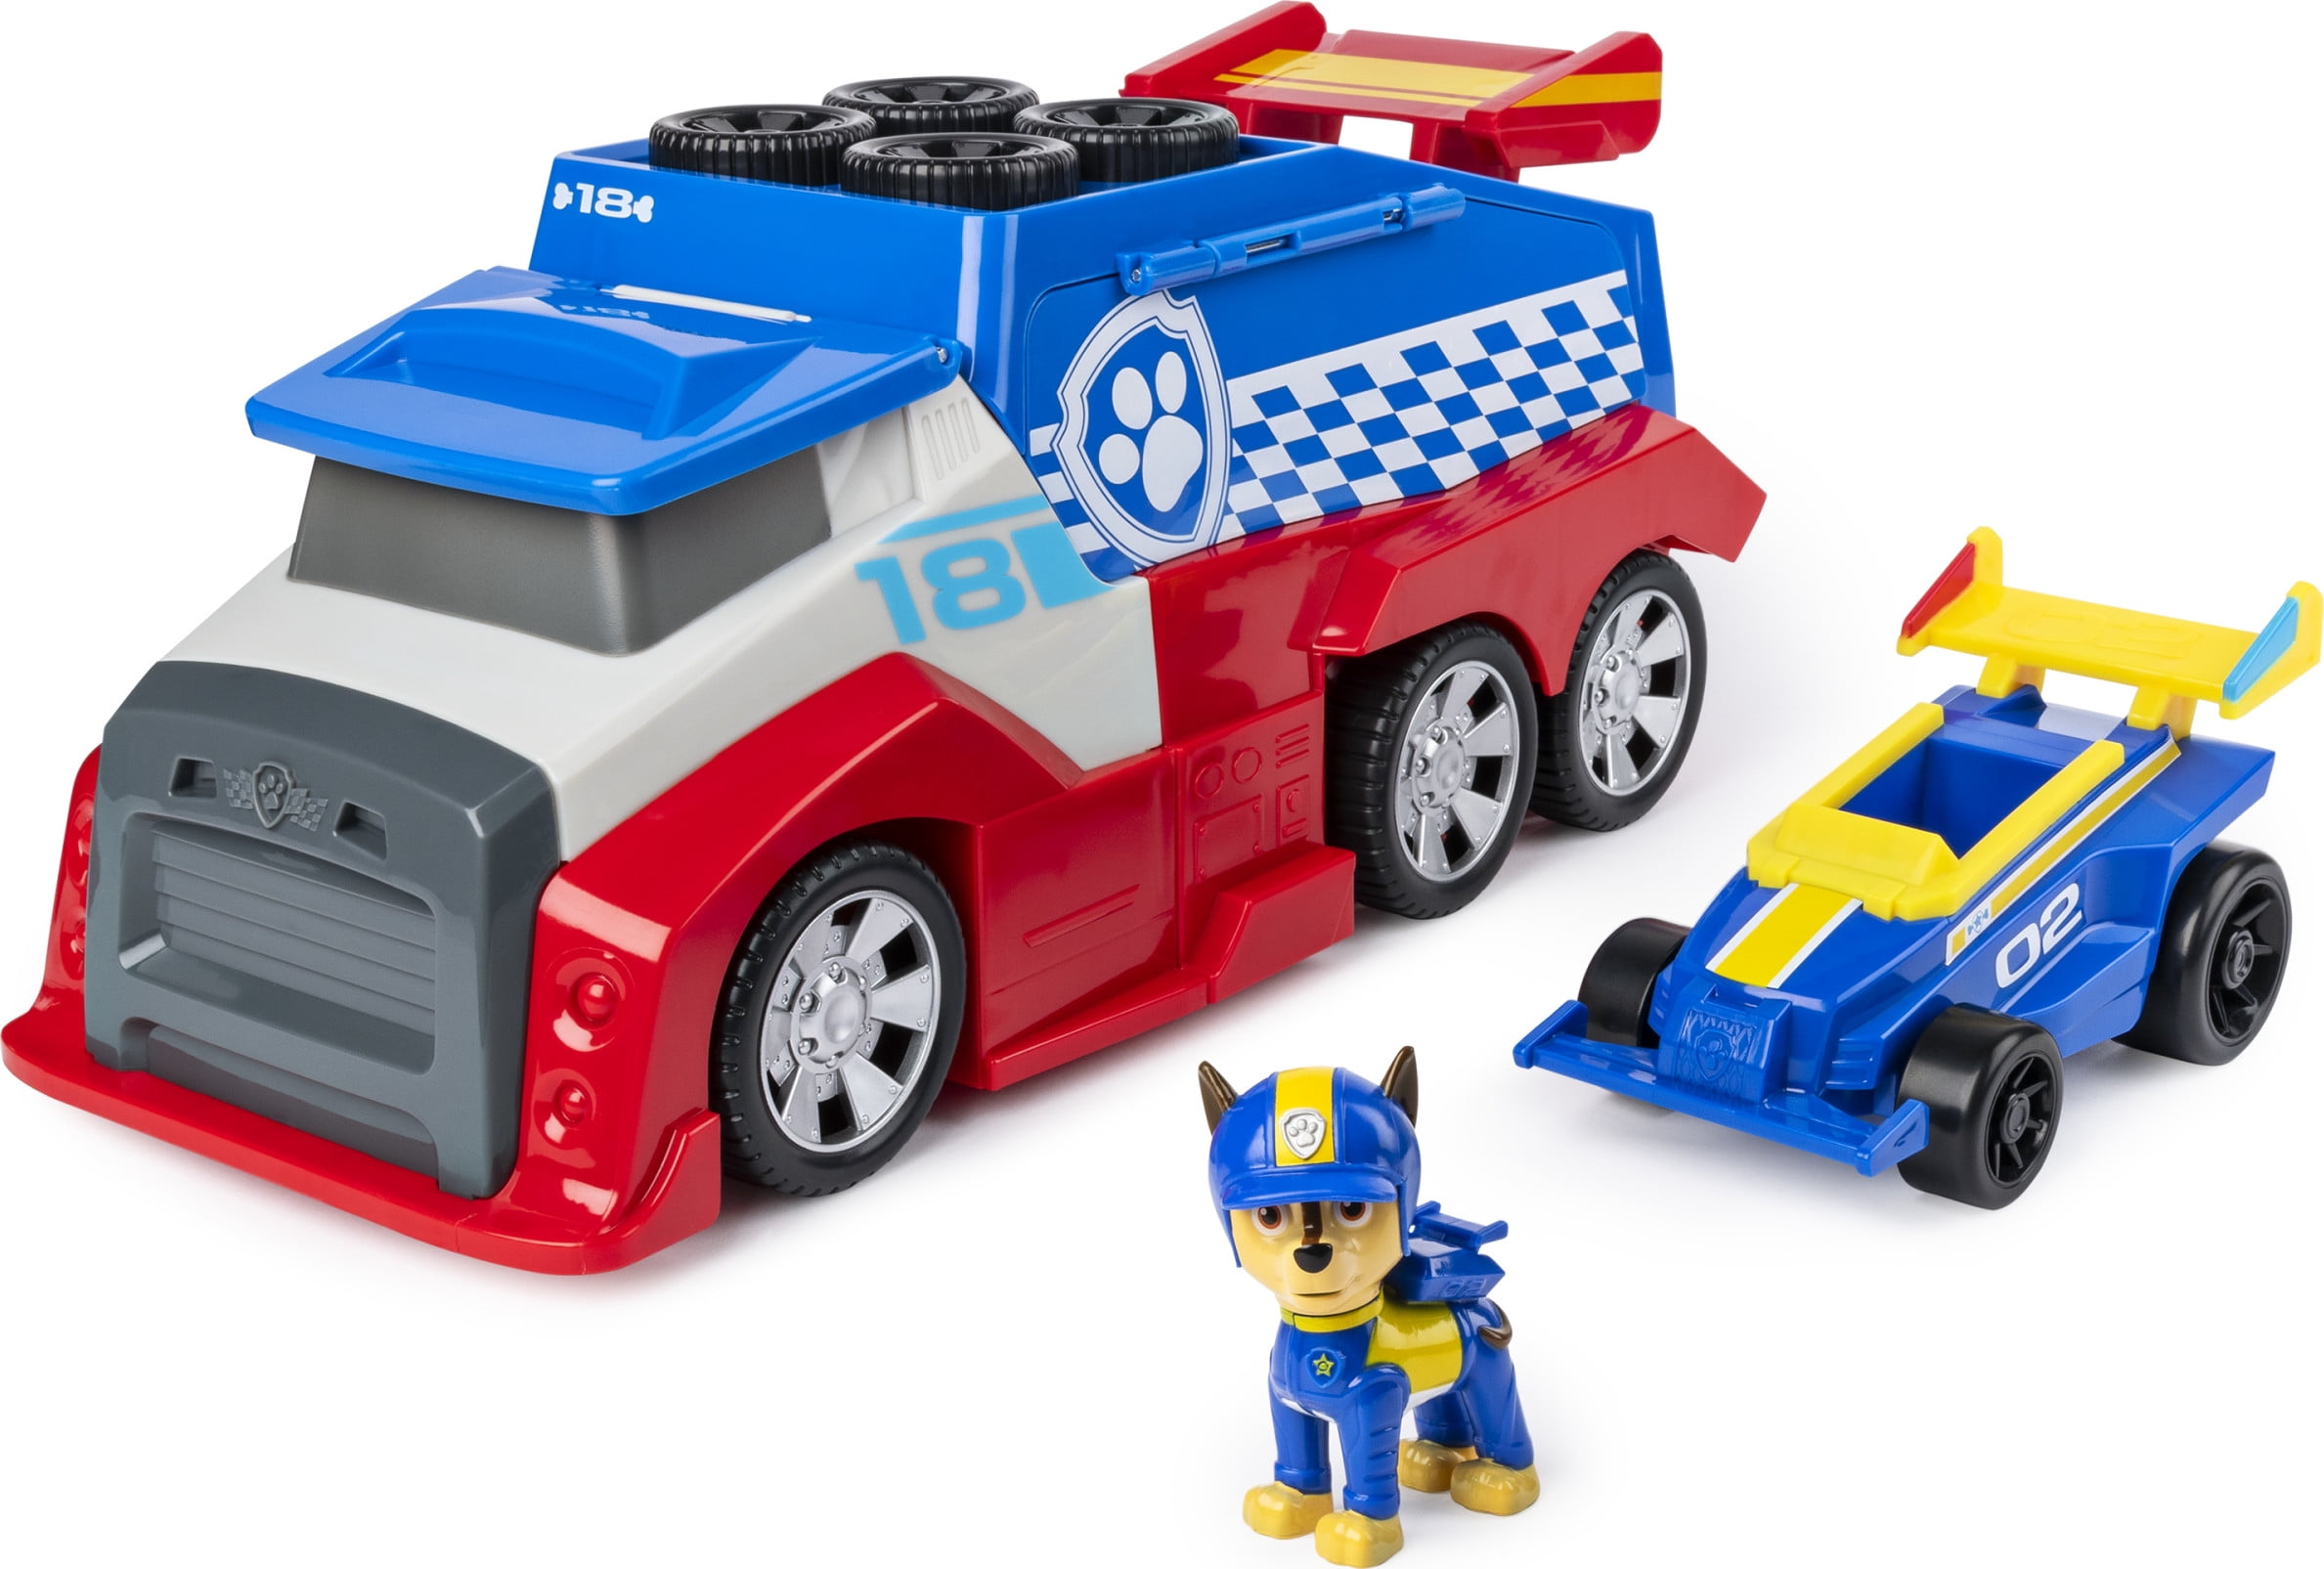 Paw Patrol Chase Spy Vehicle Racers Action Figure PupToys Kids Toy Nickelodeon